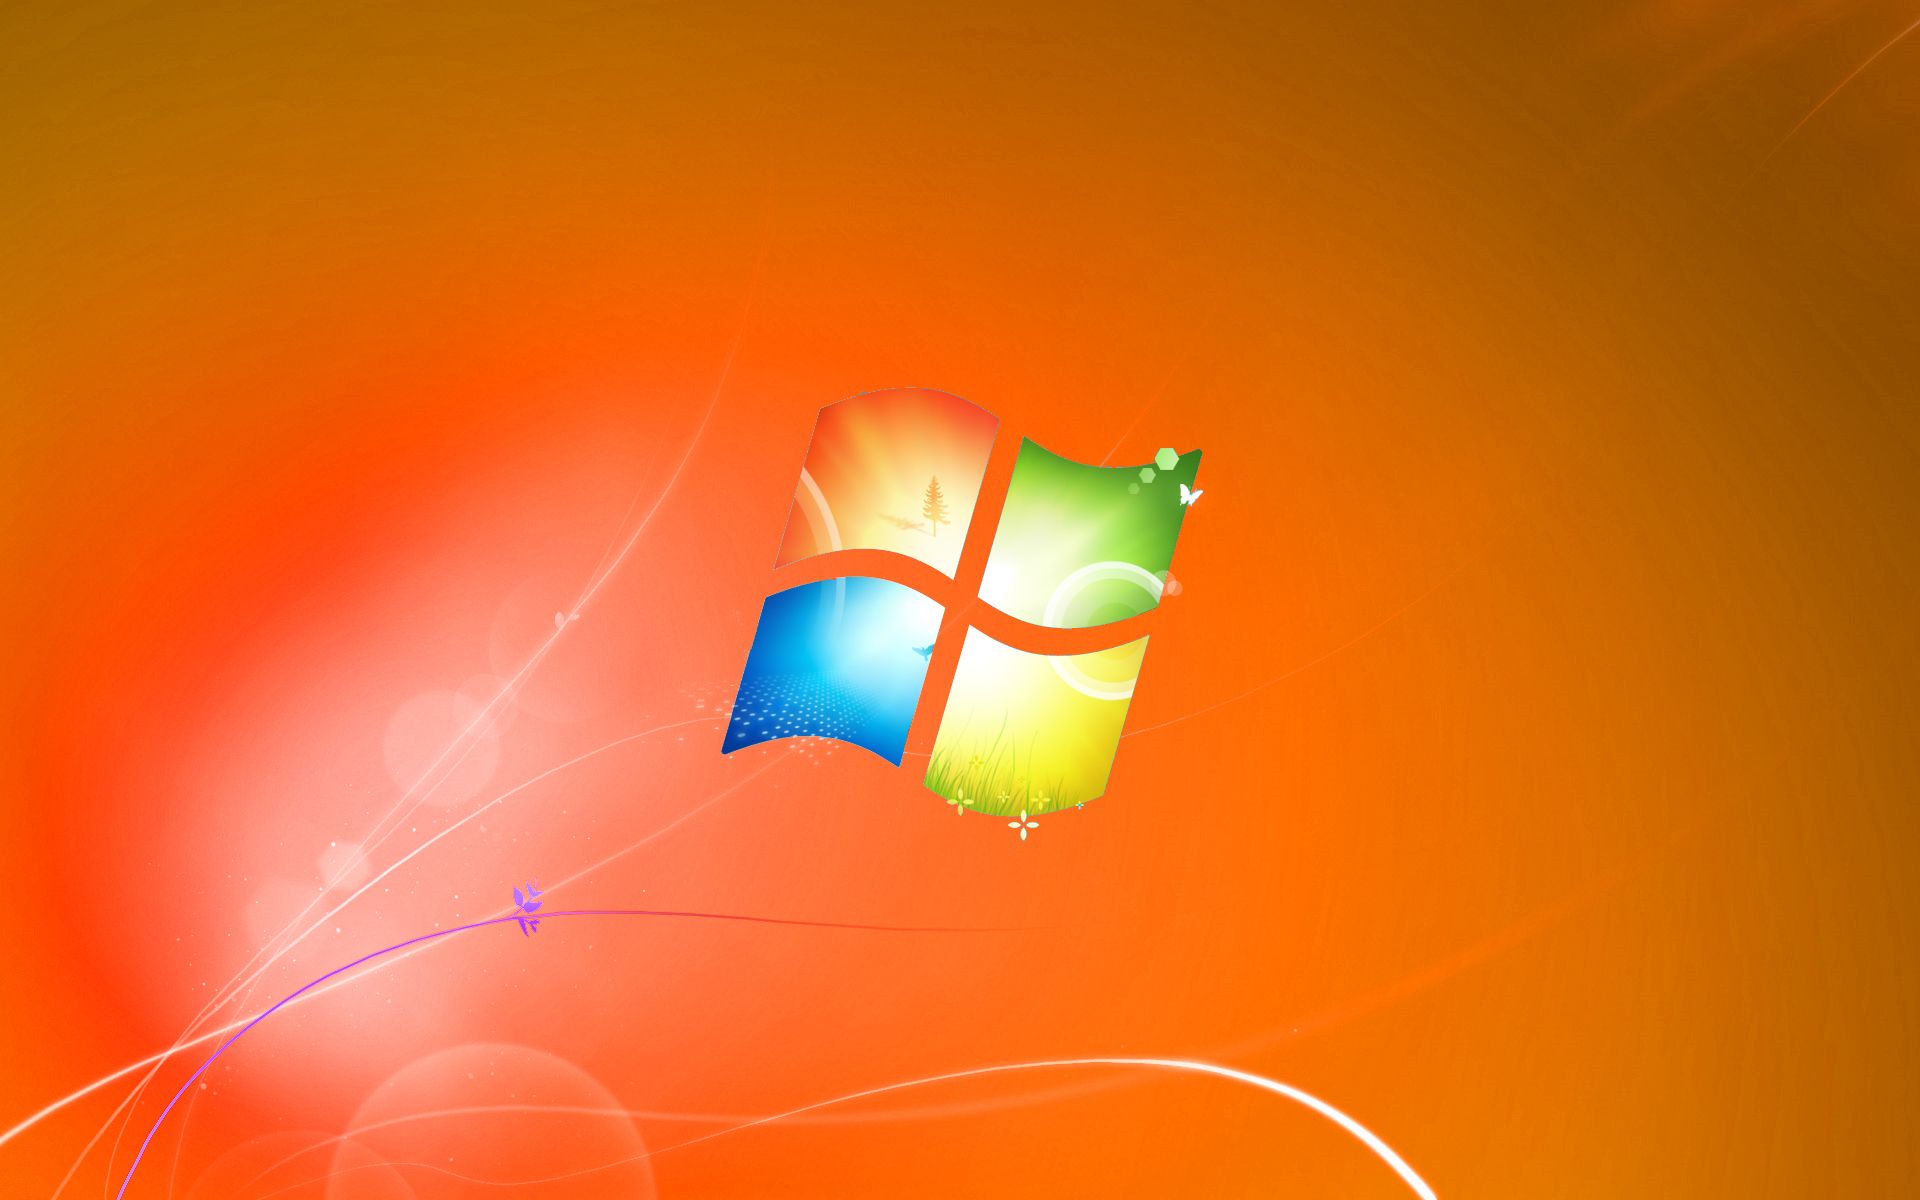 Windows 7 Default Wallpaper Green Version by dominichulme on ...